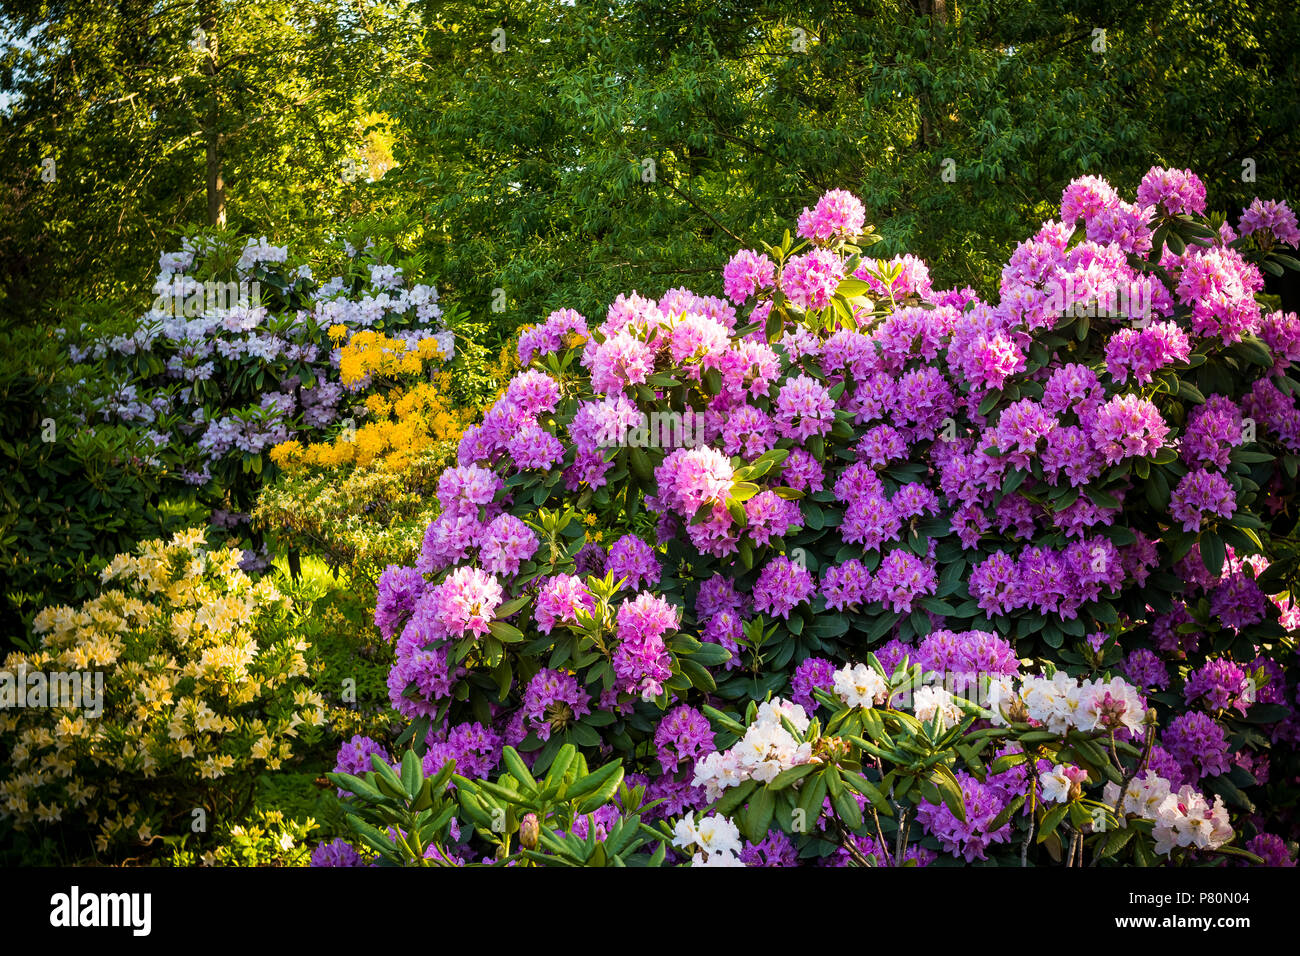 Rhododendron Plants In Bloom With Flowers Of Different Colors Azalea Bushes In The Park With Different Flower Colors Rhododendron Plants In Bloom Stock Photo Alamy